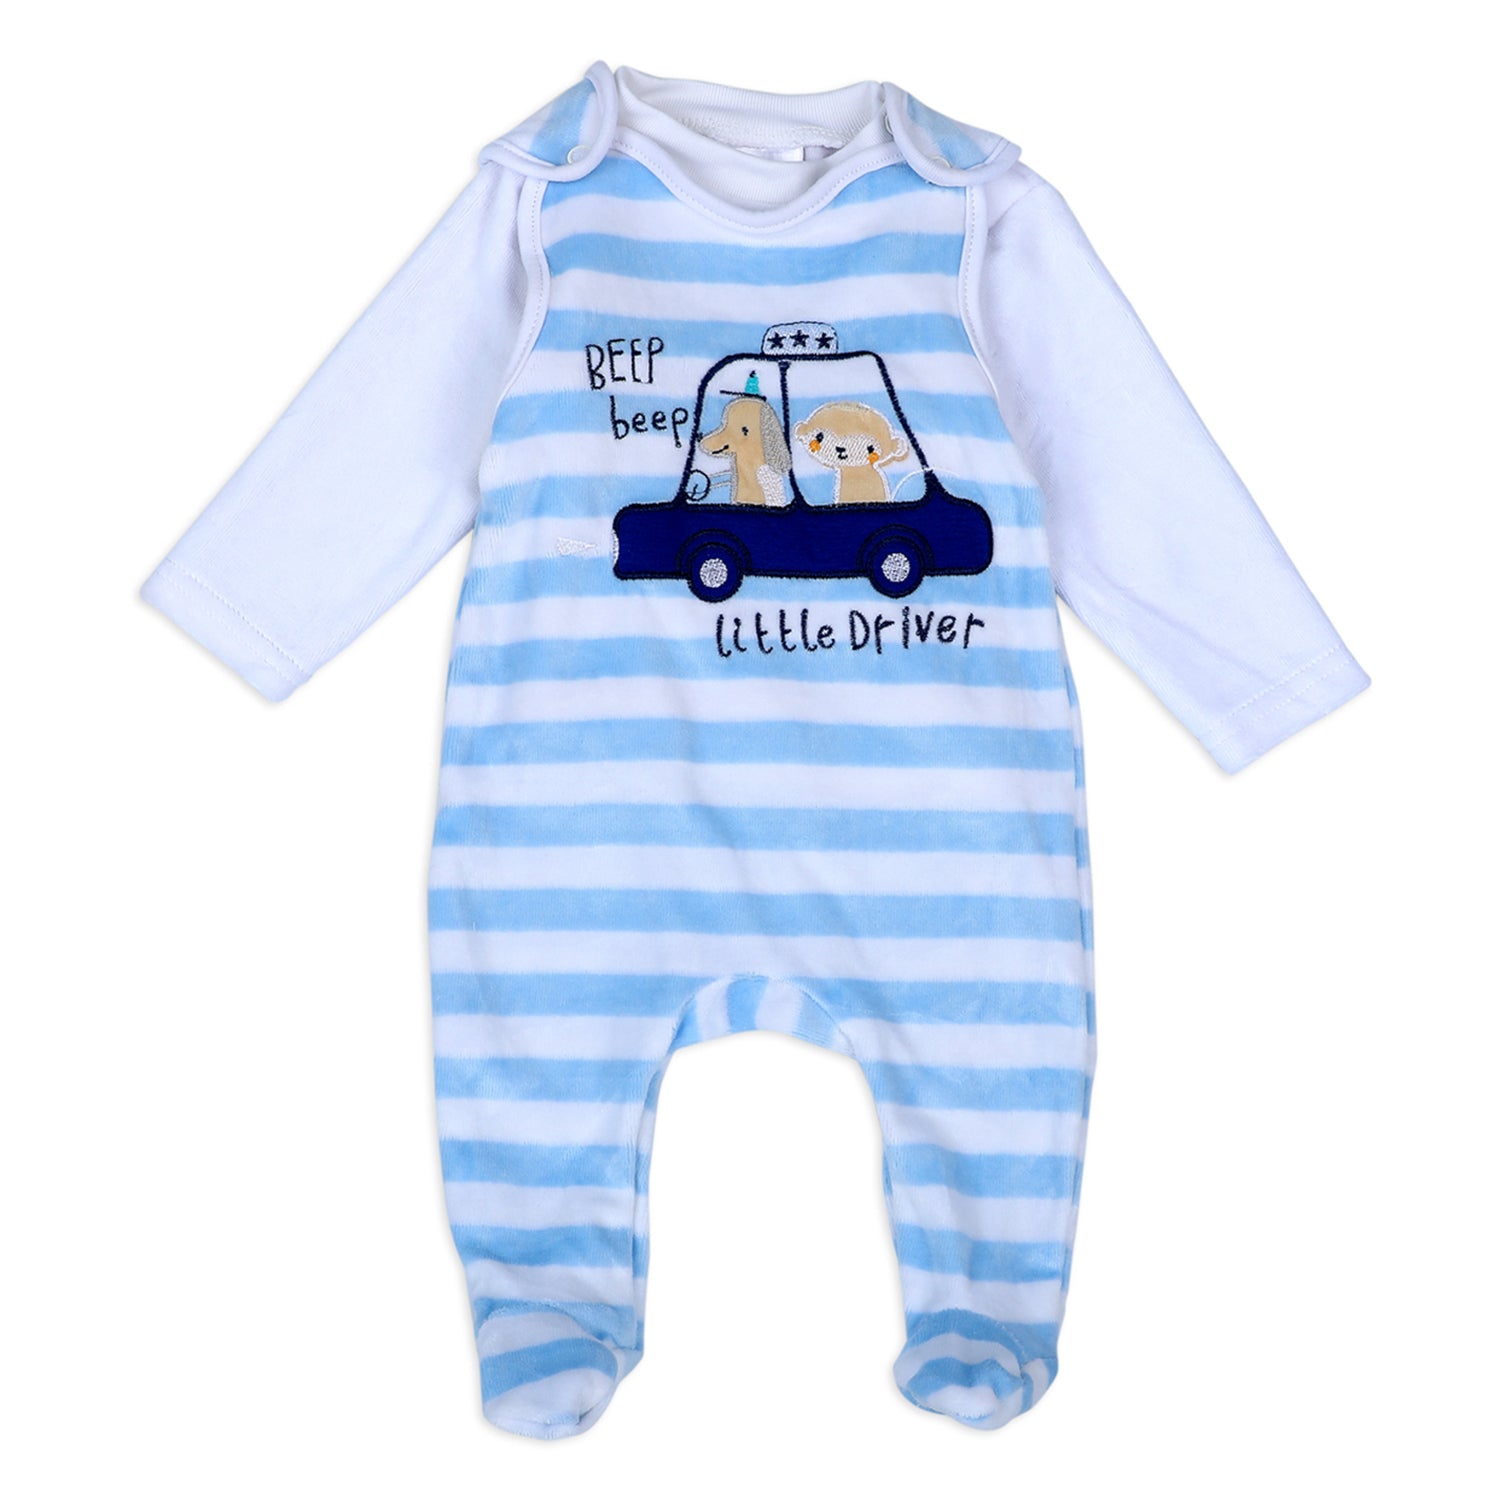 Little Driver Infant 2 Piece Full Sleeves Tshirt And Romper Set - Blue - Baby Moo